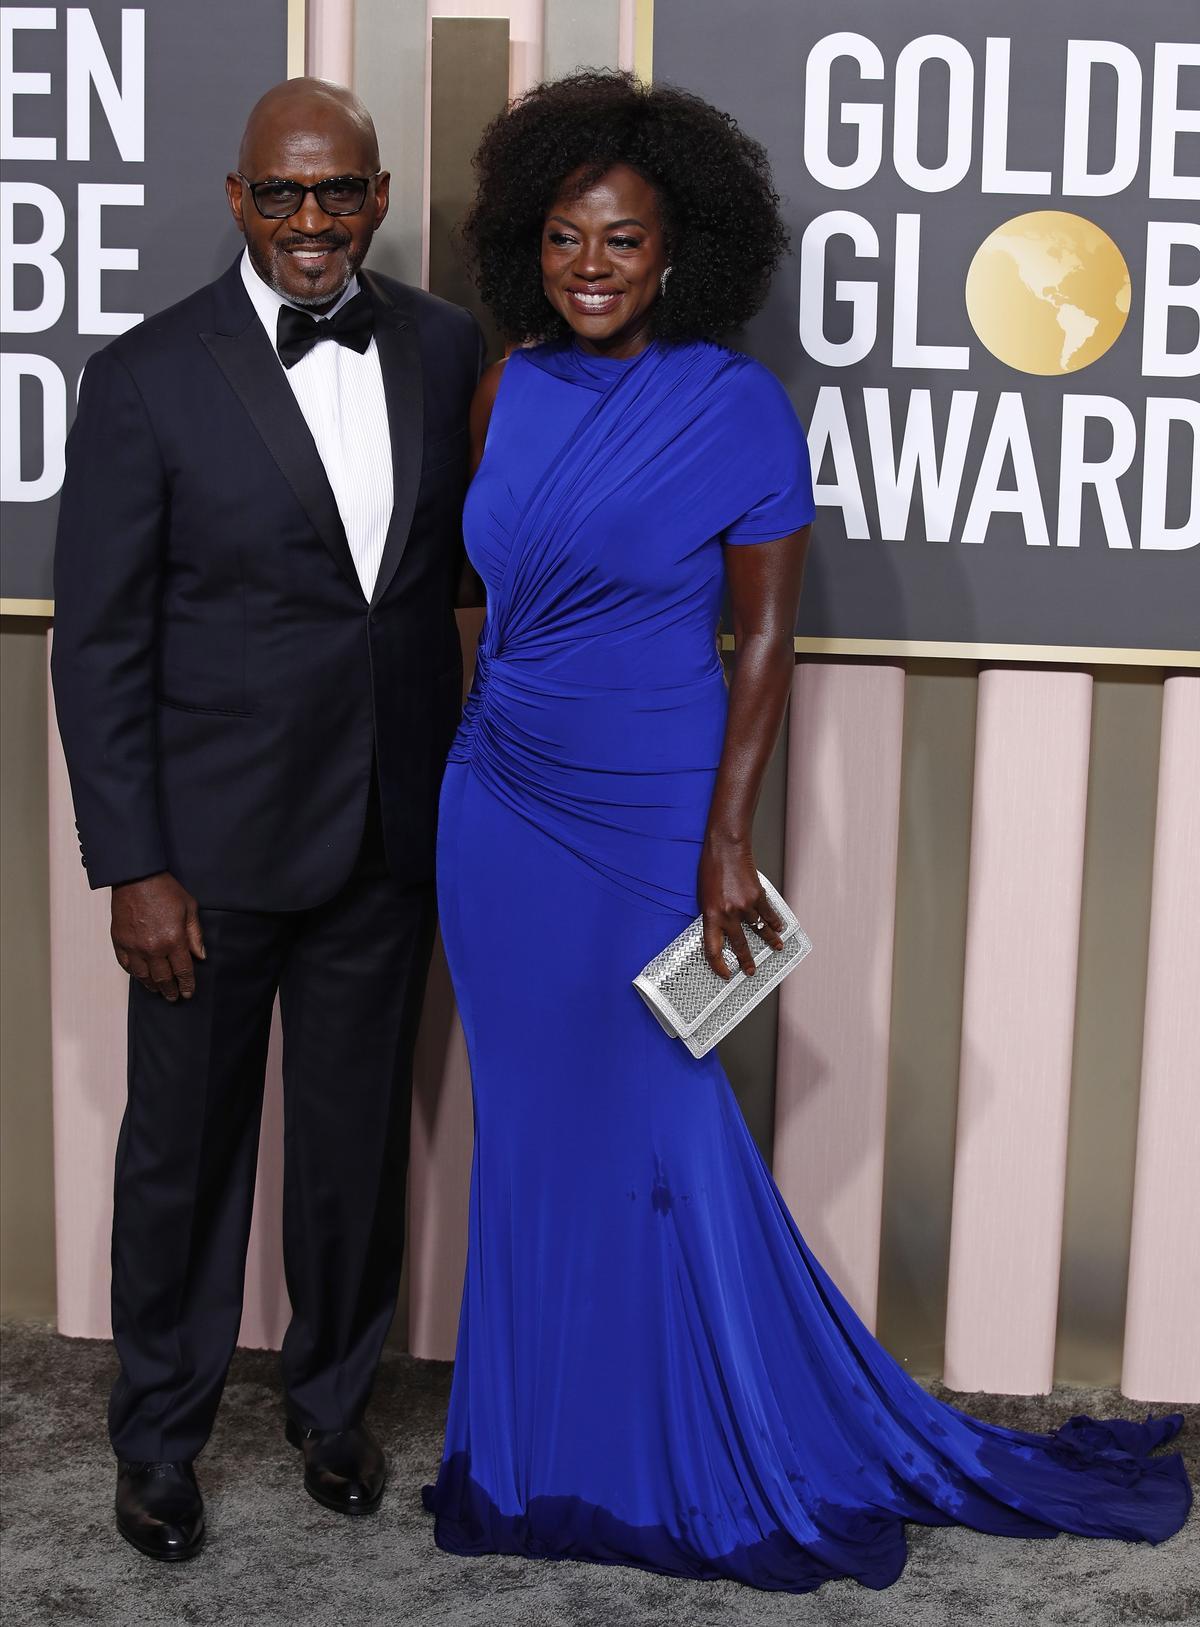 Beverly Hills (United States), 10/01/2023.- Julius Tennon (L) and Viola Davis (R) arrive for the 80th annual Golden Globe Awards ceremony at the Beverly Hilton Hotel, in Beverly Hills, California, USA, 10 January 2023. Artists in various film and television categories are awarded Golden Globes by the Hollywood Foreign Press Association. (Estados Unidos) EFE/EPA/CAROLINE BREHMAN